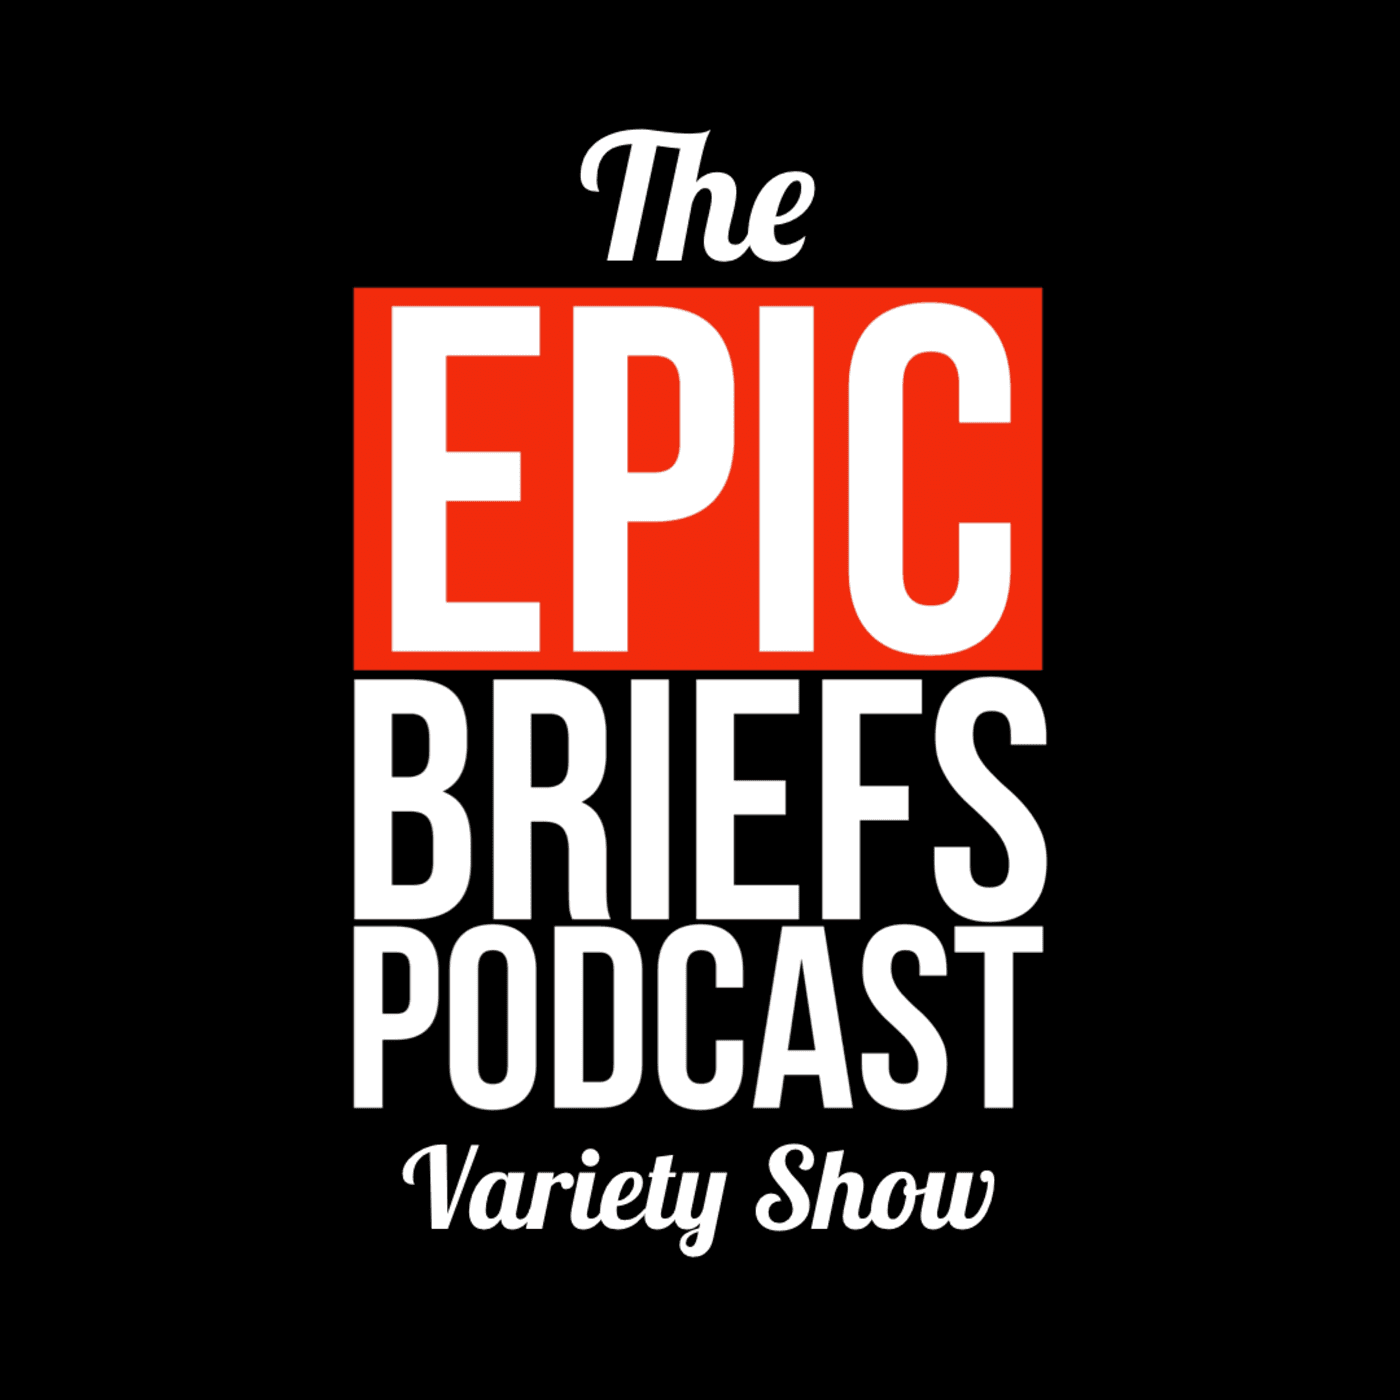 Epic Briefs Podcast